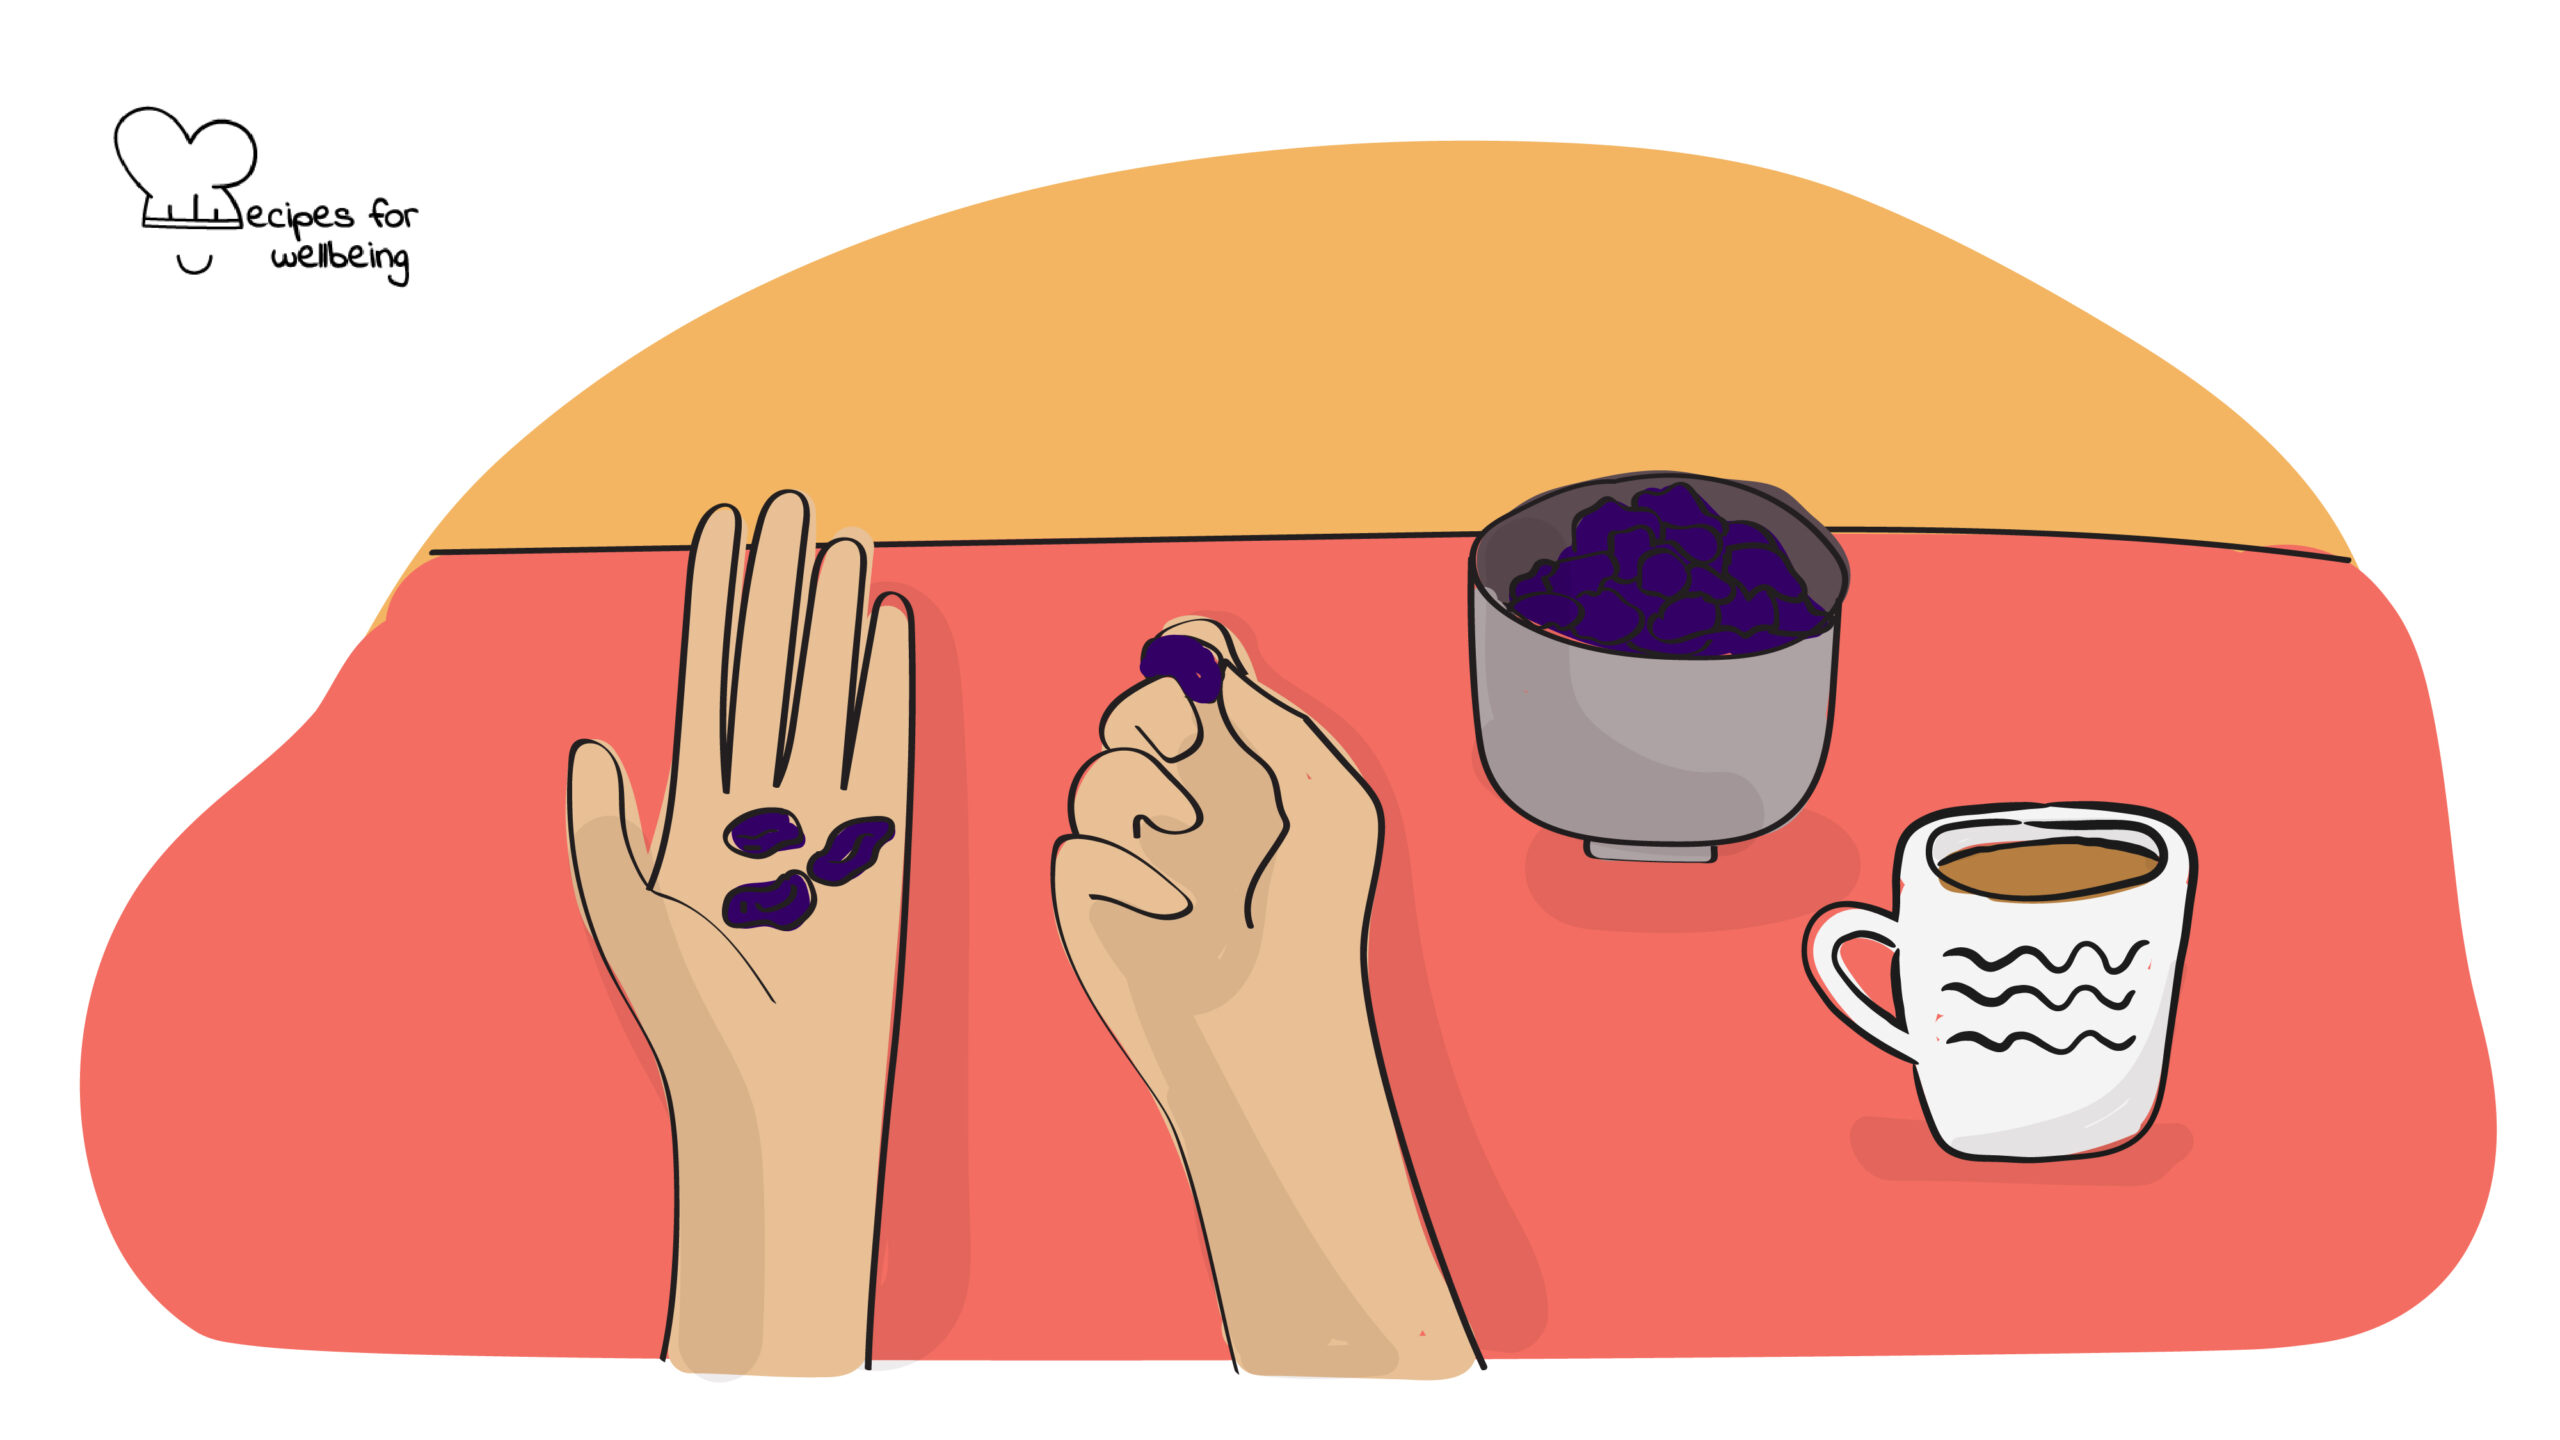 Illustration of a person's hand holding a few raisins). © Recipes for Wellbeing